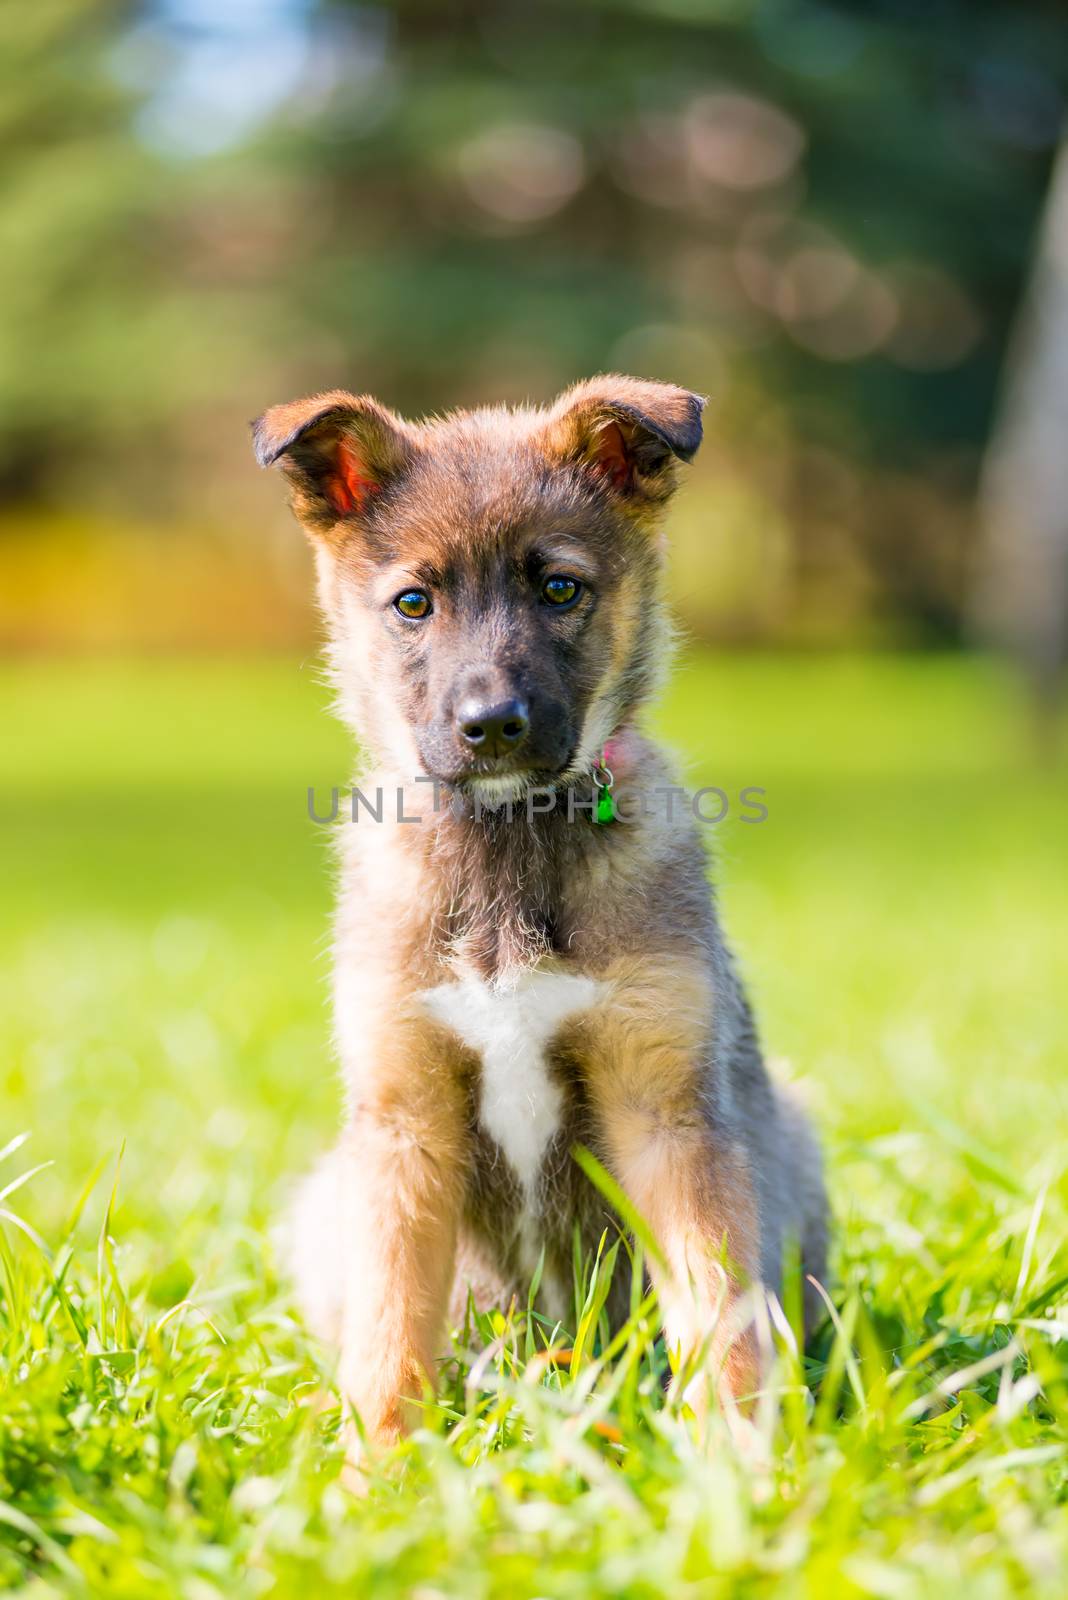 vertical portrait of a puppy in a park on green grass on a summer day